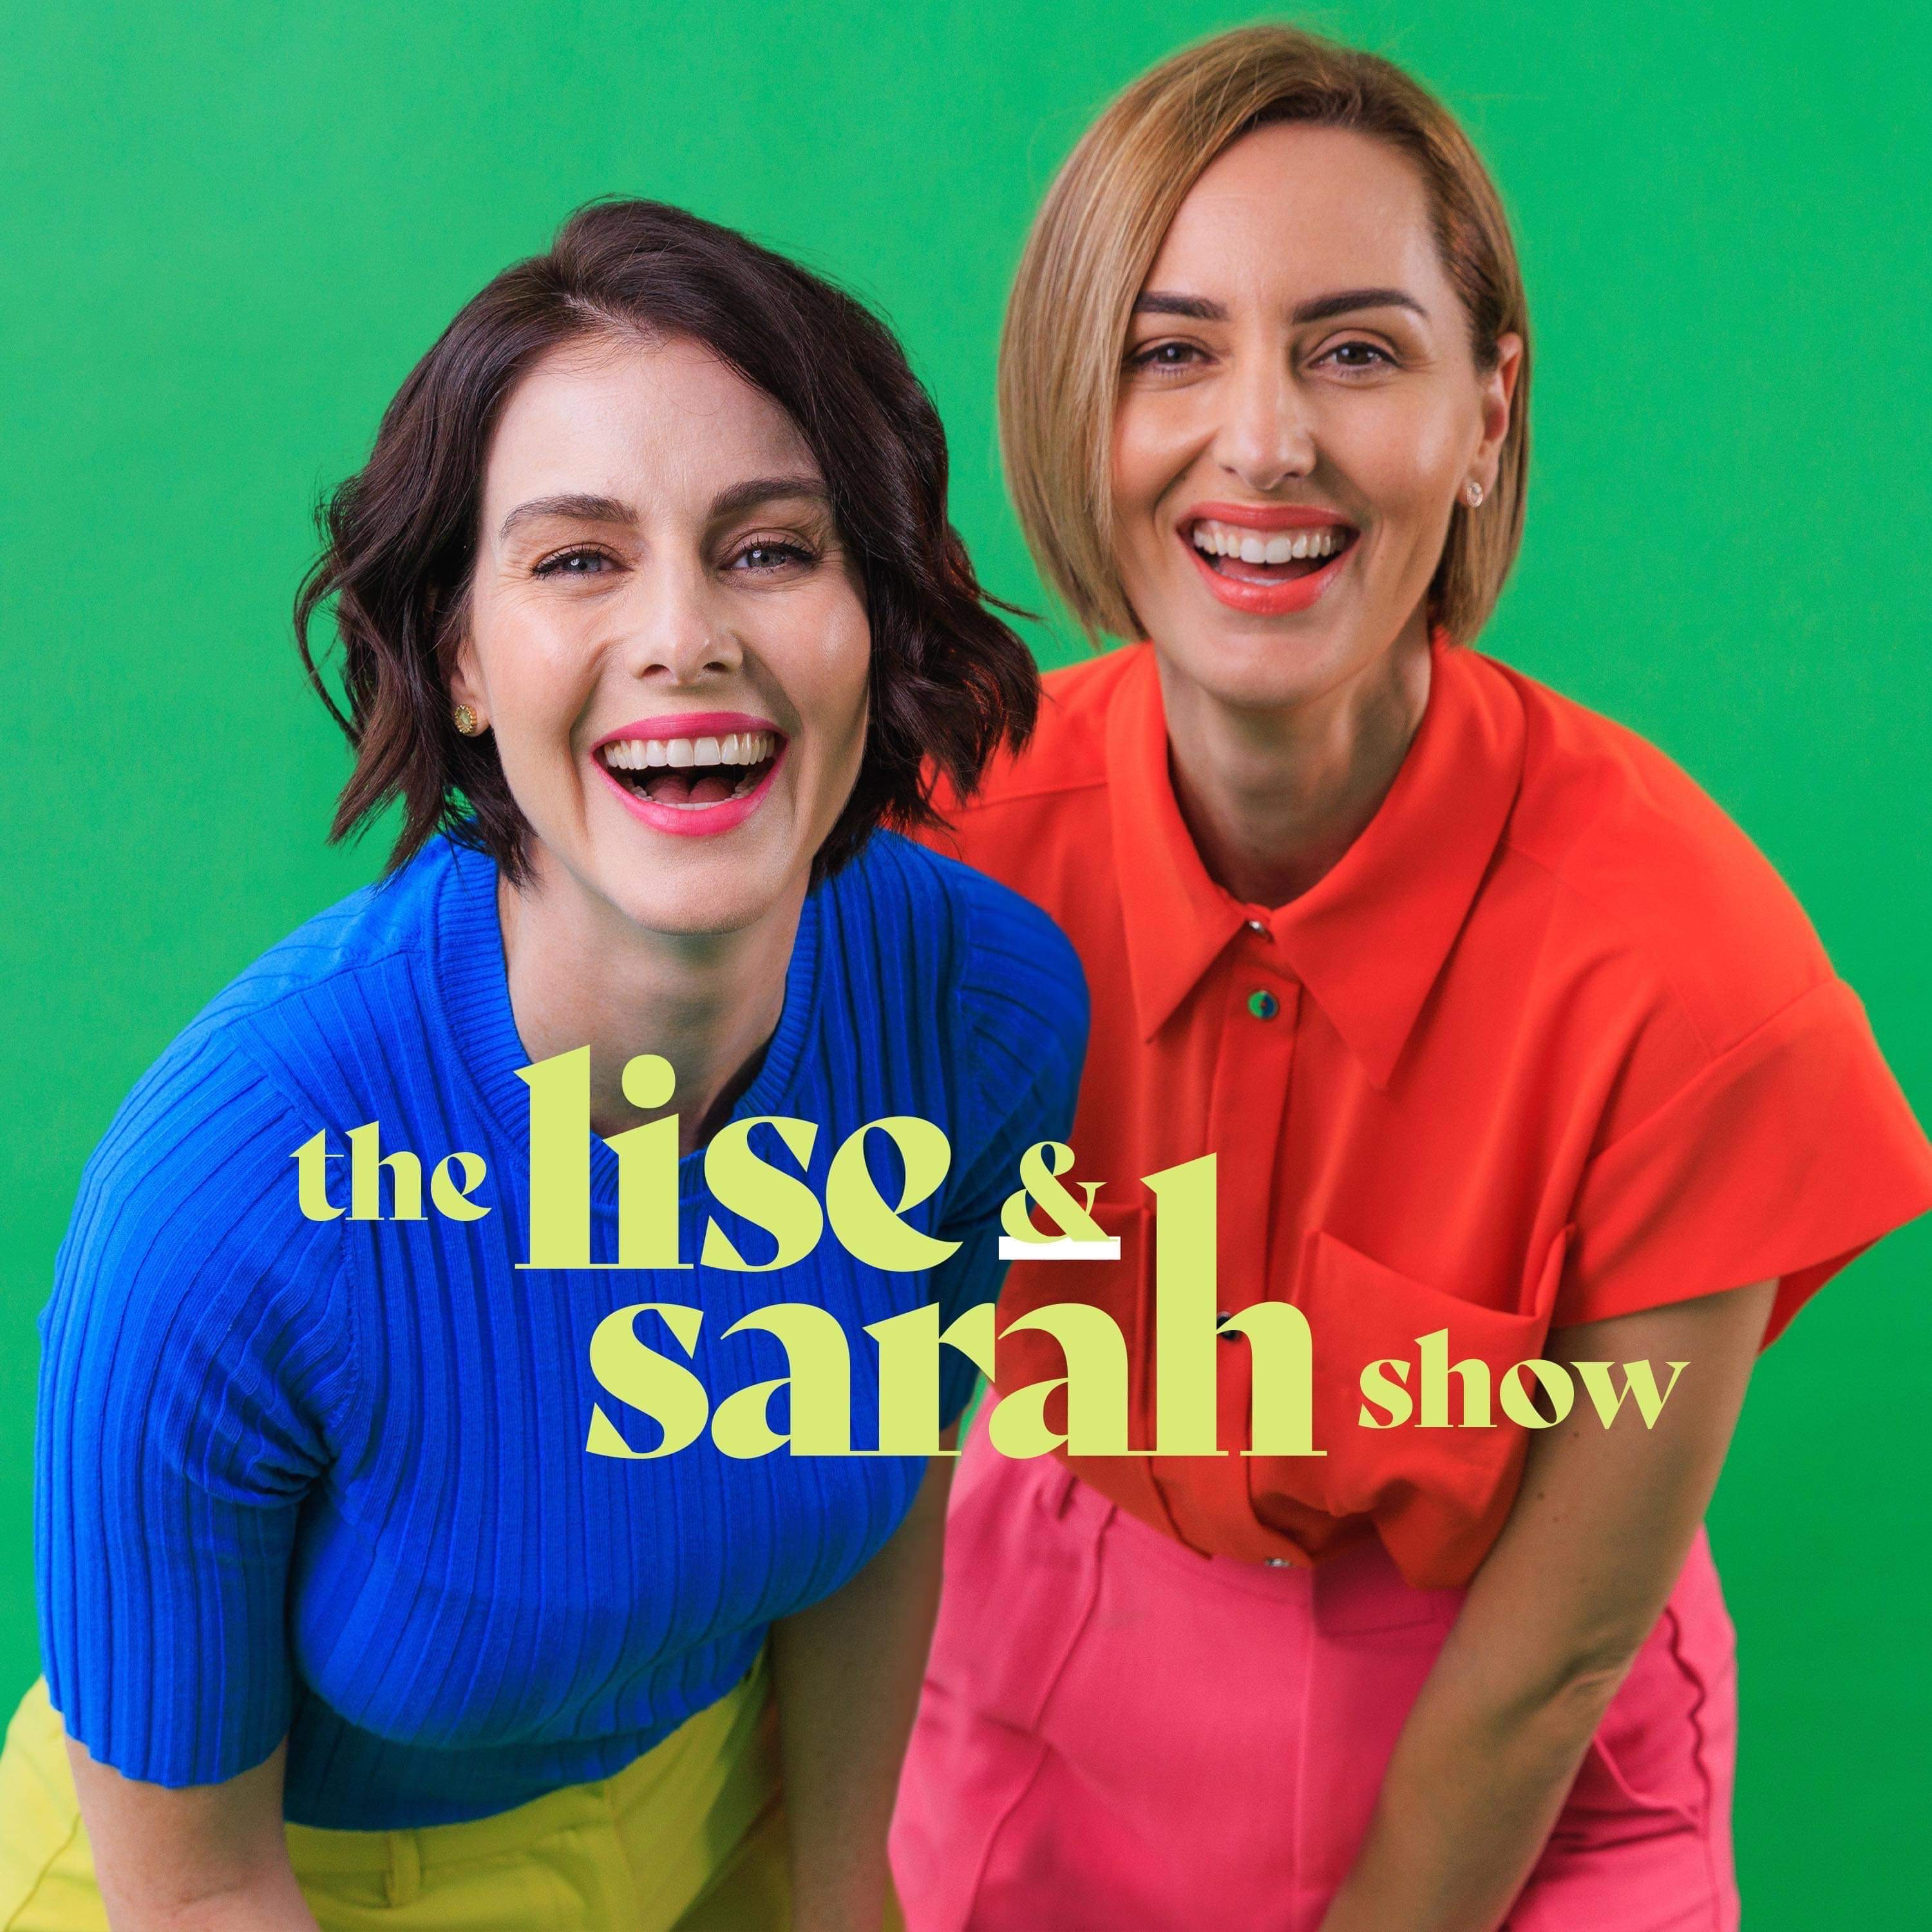 Lise stresses about not knowing a relaxed woman and Sarah does a stupid quiz